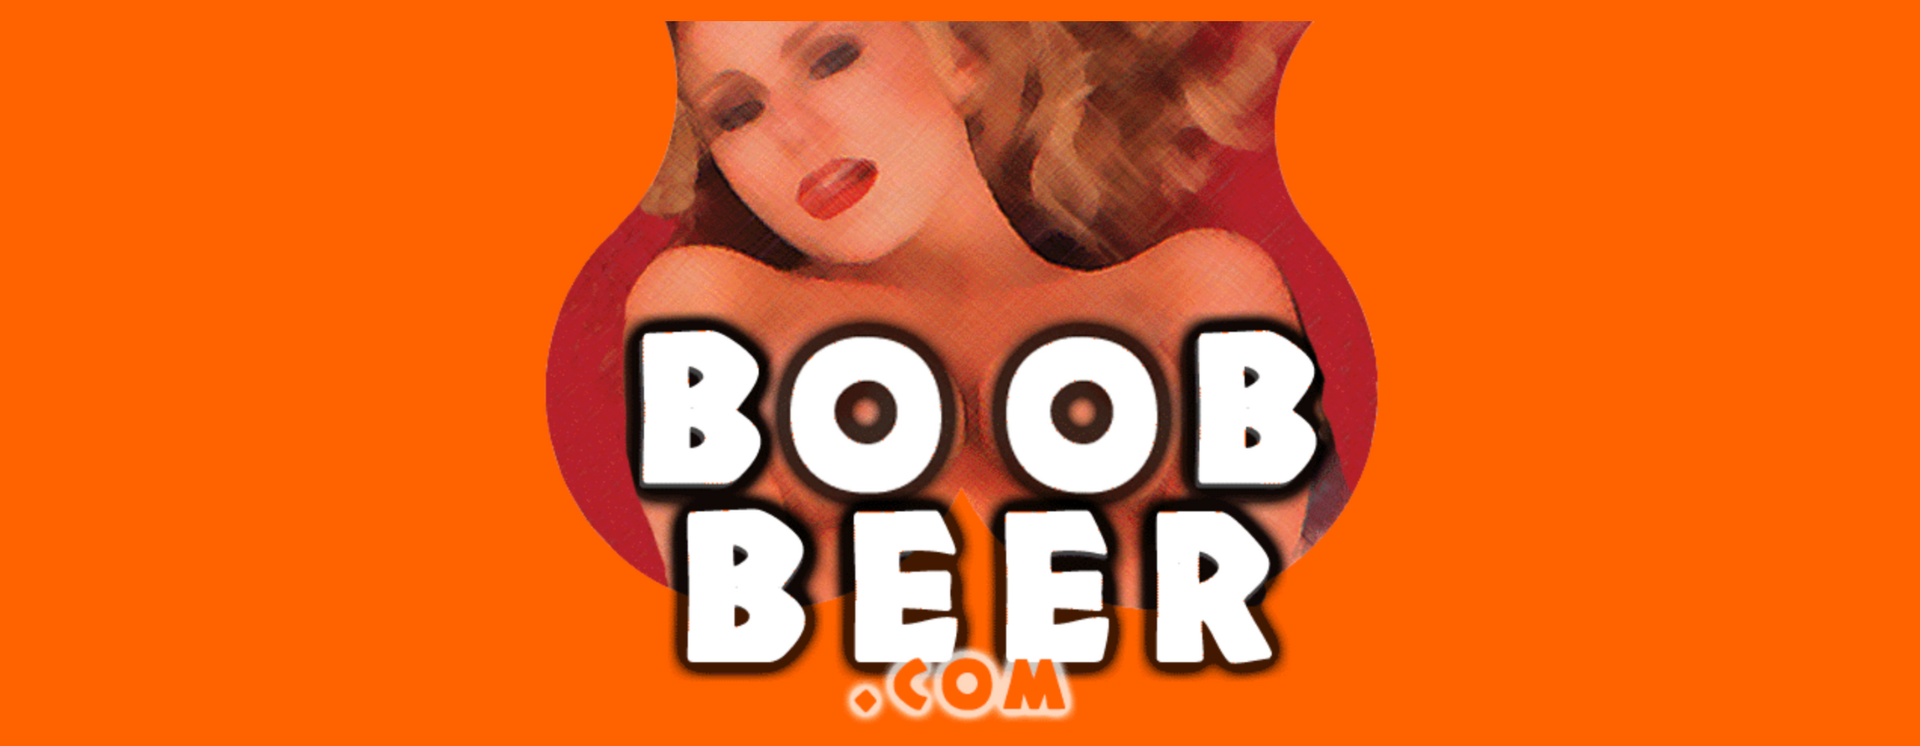 boob beer, boobbeeer.com, boob beer.com, boob, beer, boobbeer, boobbbeer, boobeer, beerboob, boob beer website, drinking, drunk, chick beer, boobs and beer, beer and boobs, boob and beer, boobsbeer.com, alcohol, chicks, girls, babes, bitches, bitches and beers, girls and beer, beer and girls, chicks and beer, beer and chicks, beer beer beer, boston beer